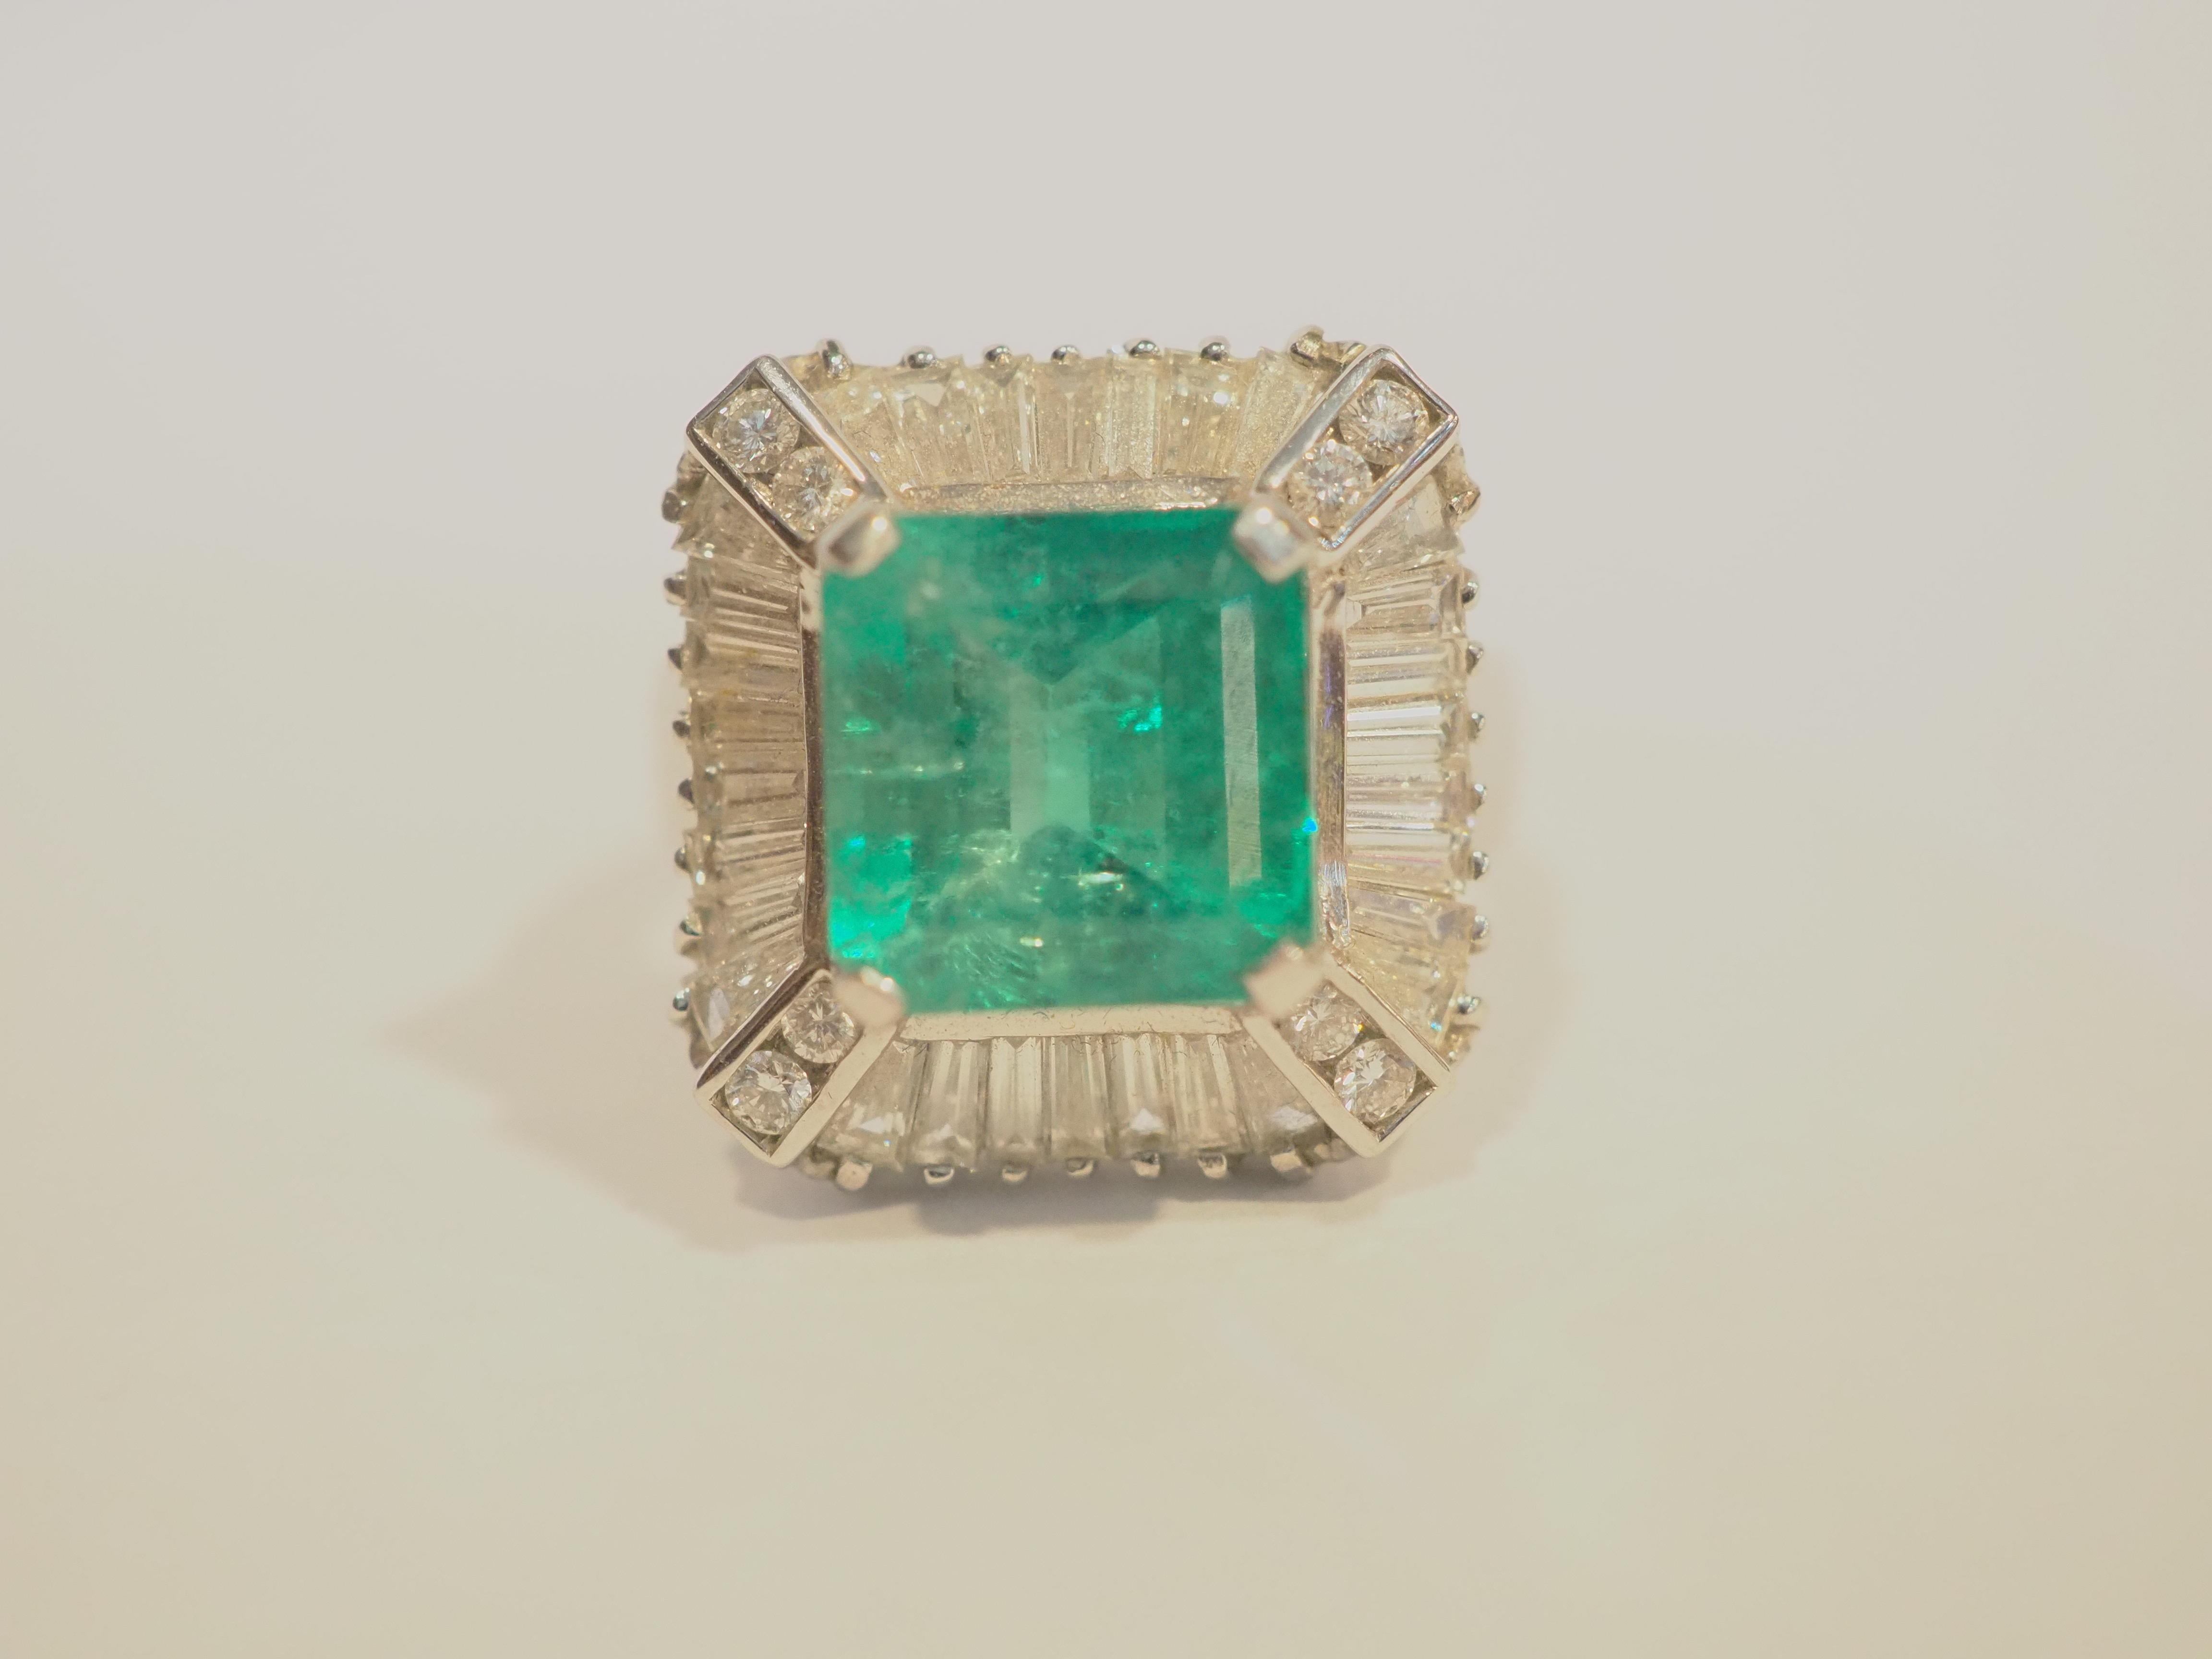  This beautiful cocktail ring boasts a spectacular and good quality emerald cut Colombian emerald! The diamonds are bright and lively and clarity and color all surrounding the beautiful leaf green gemstone. This ring is never worn and kept as like